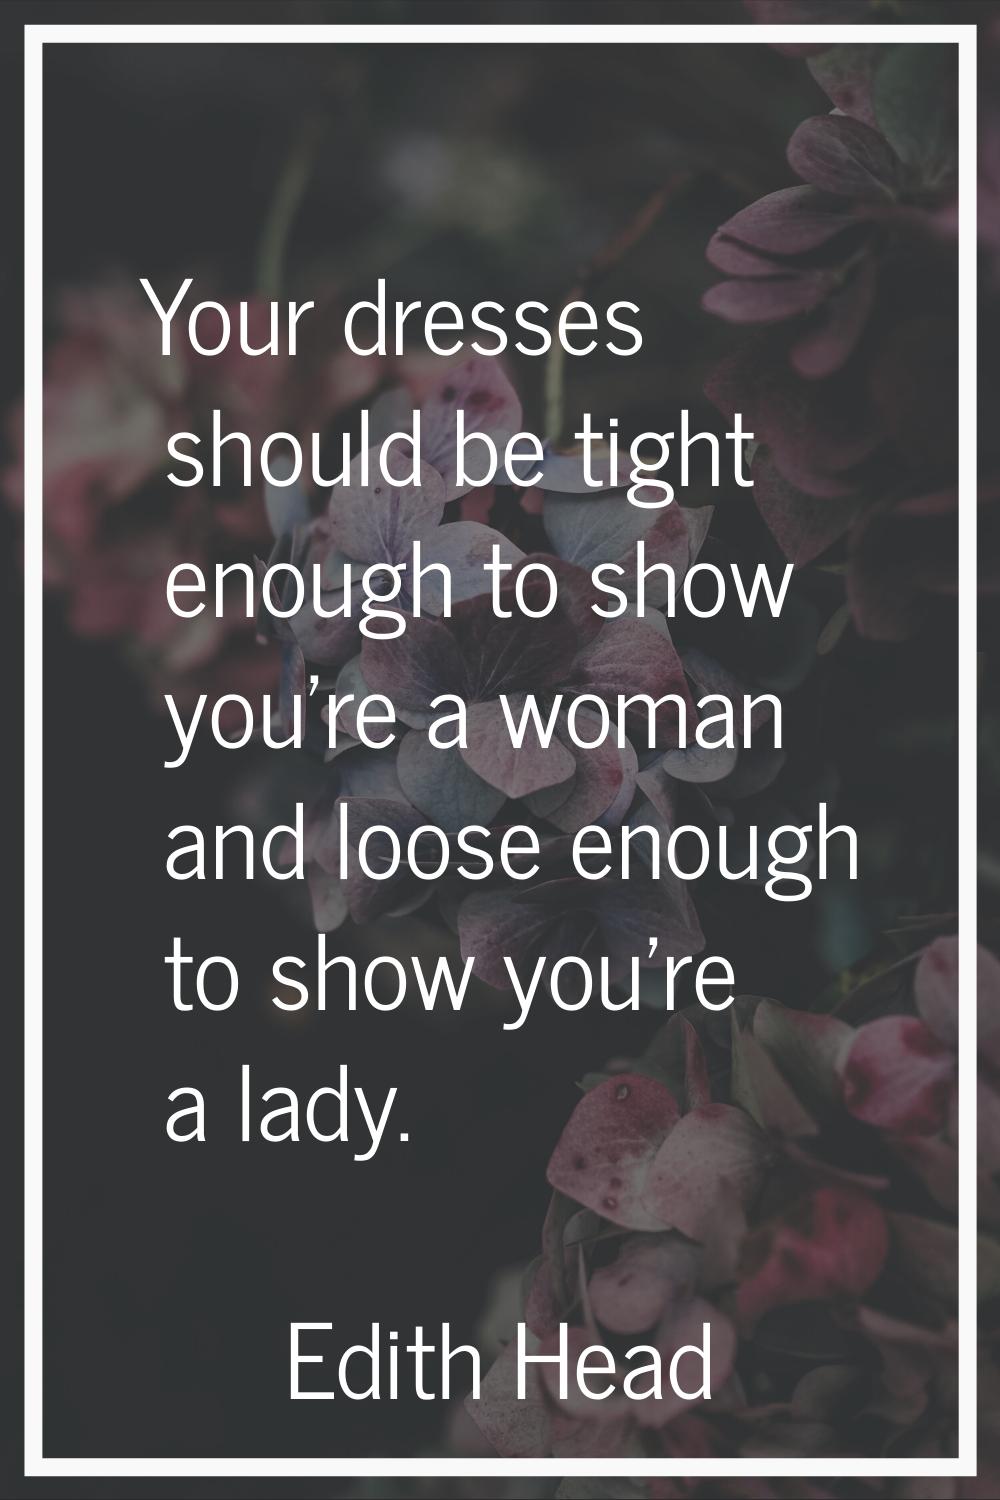 Your dresses should be tight enough to show you're a woman and loose enough to show you're a lady.